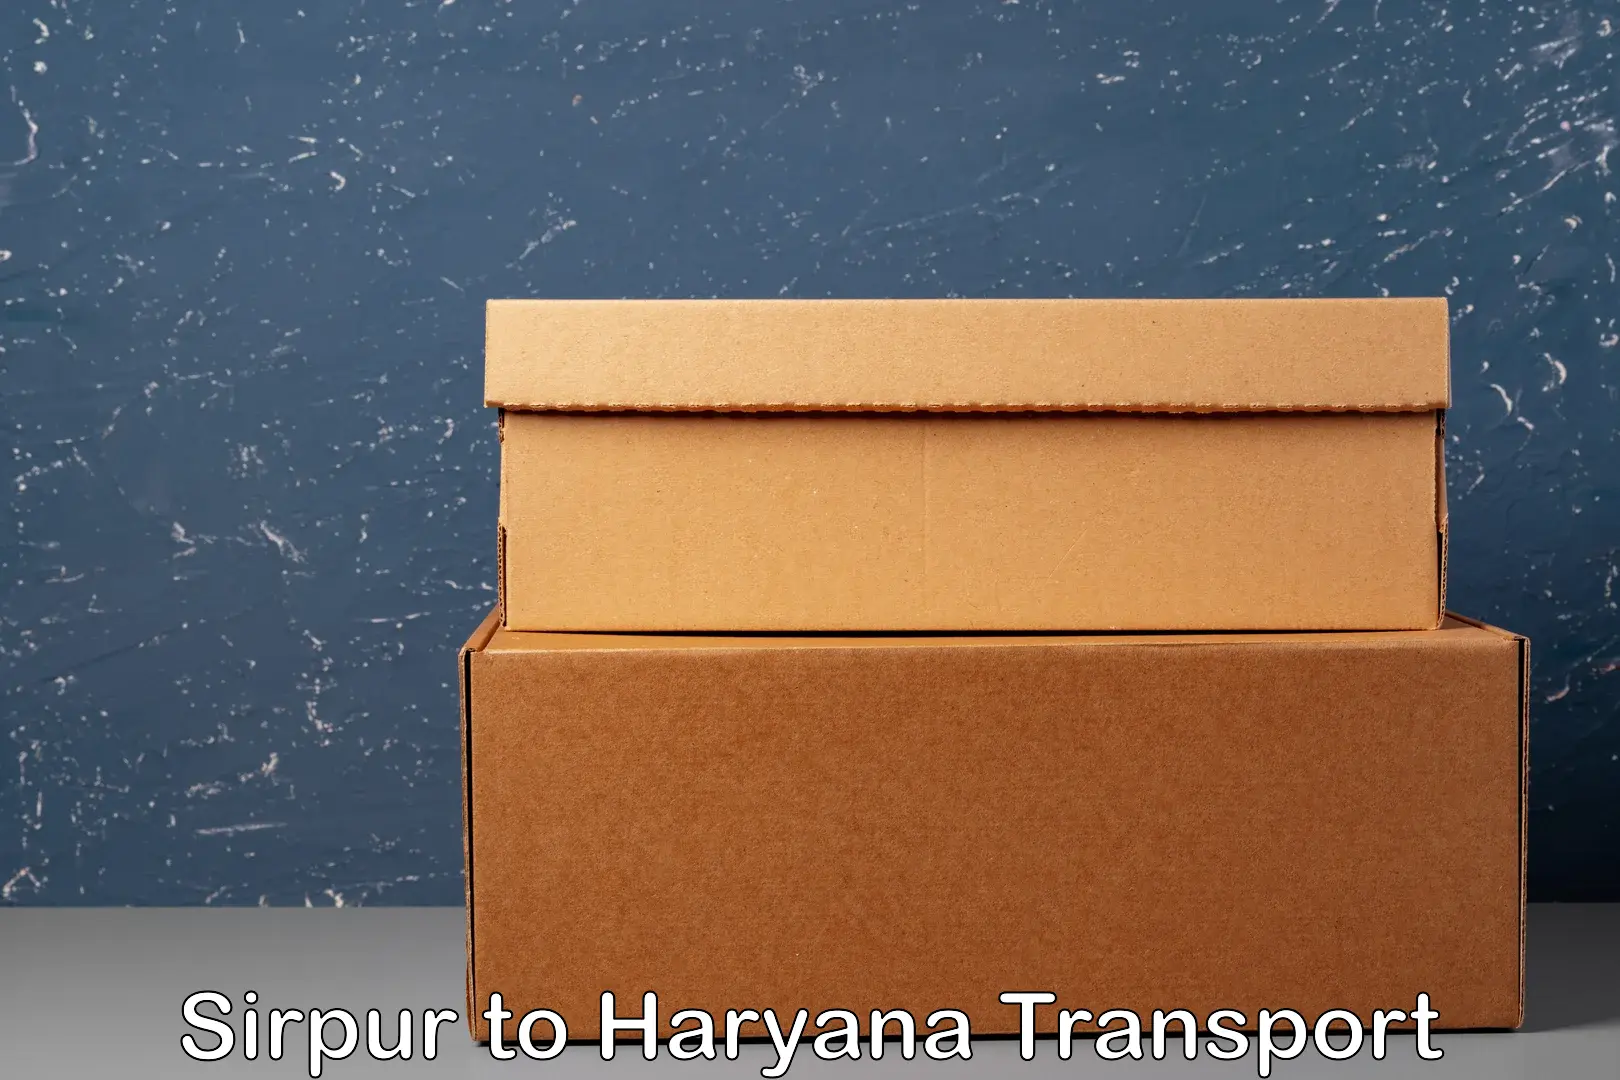 Domestic goods transportation services in Sirpur to Haryana